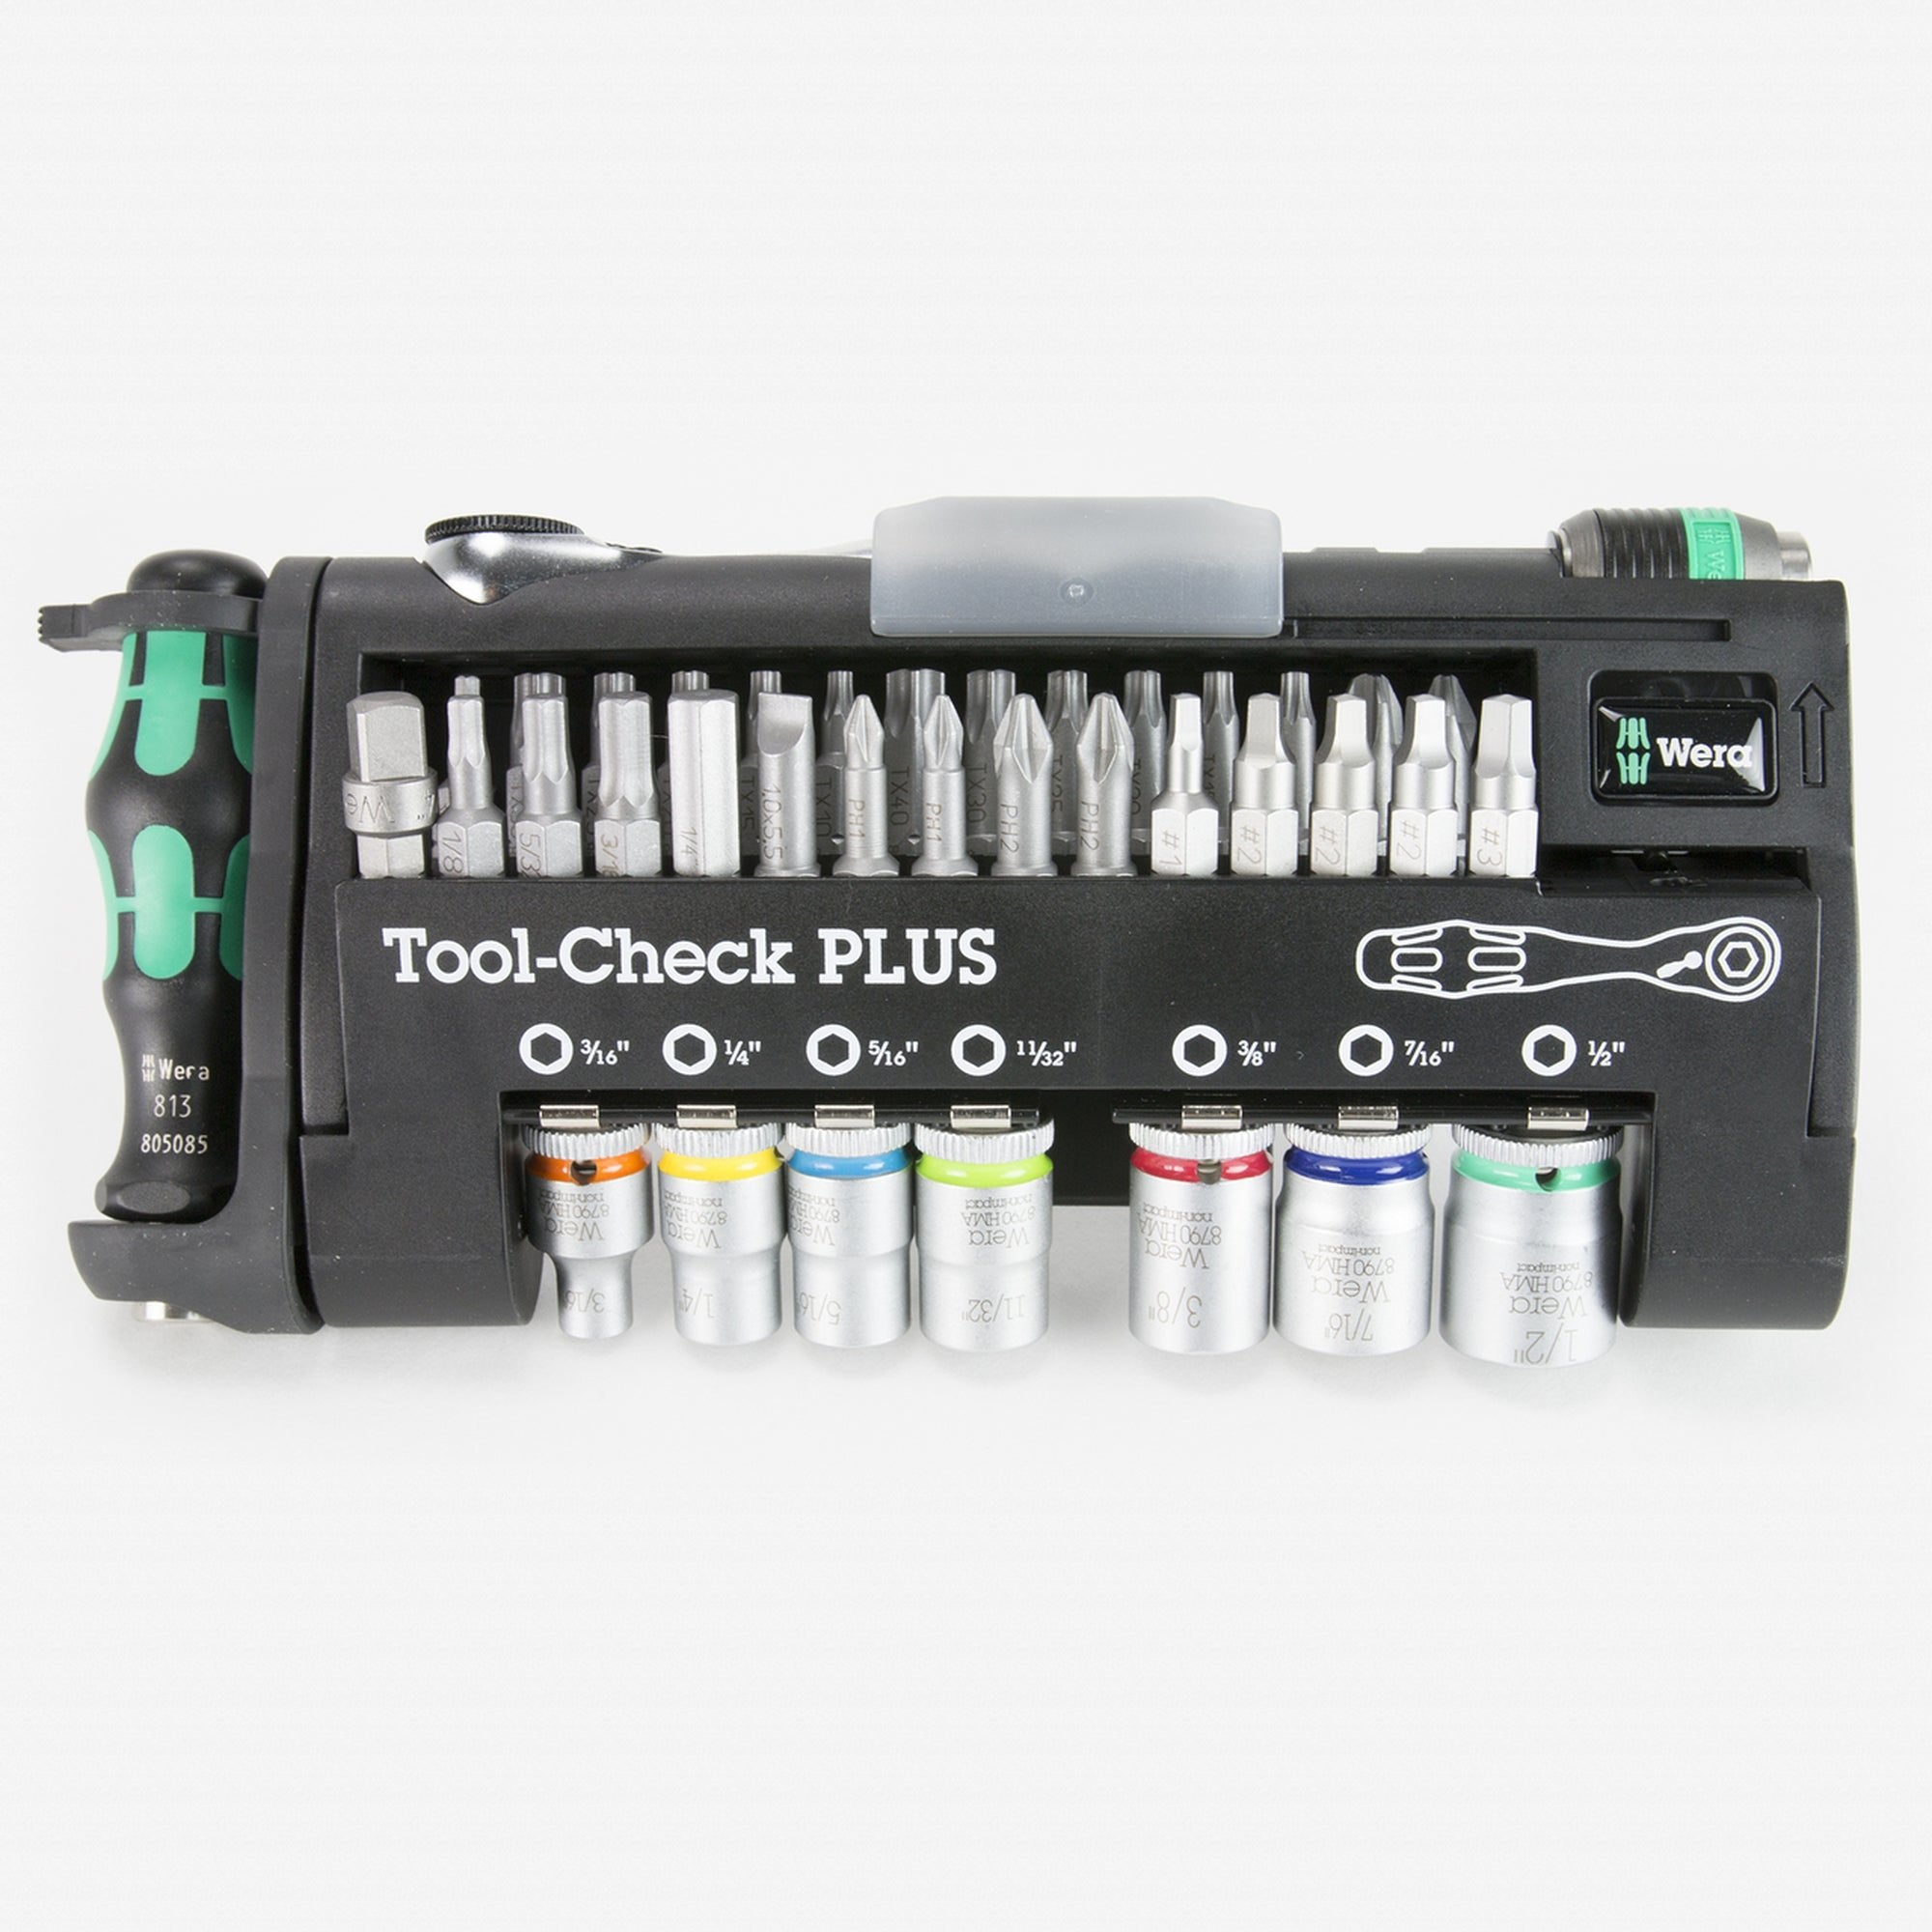 Wera 056491  -  Tool-Check Plus Bit Ratchet Set with Sockets - Imperial